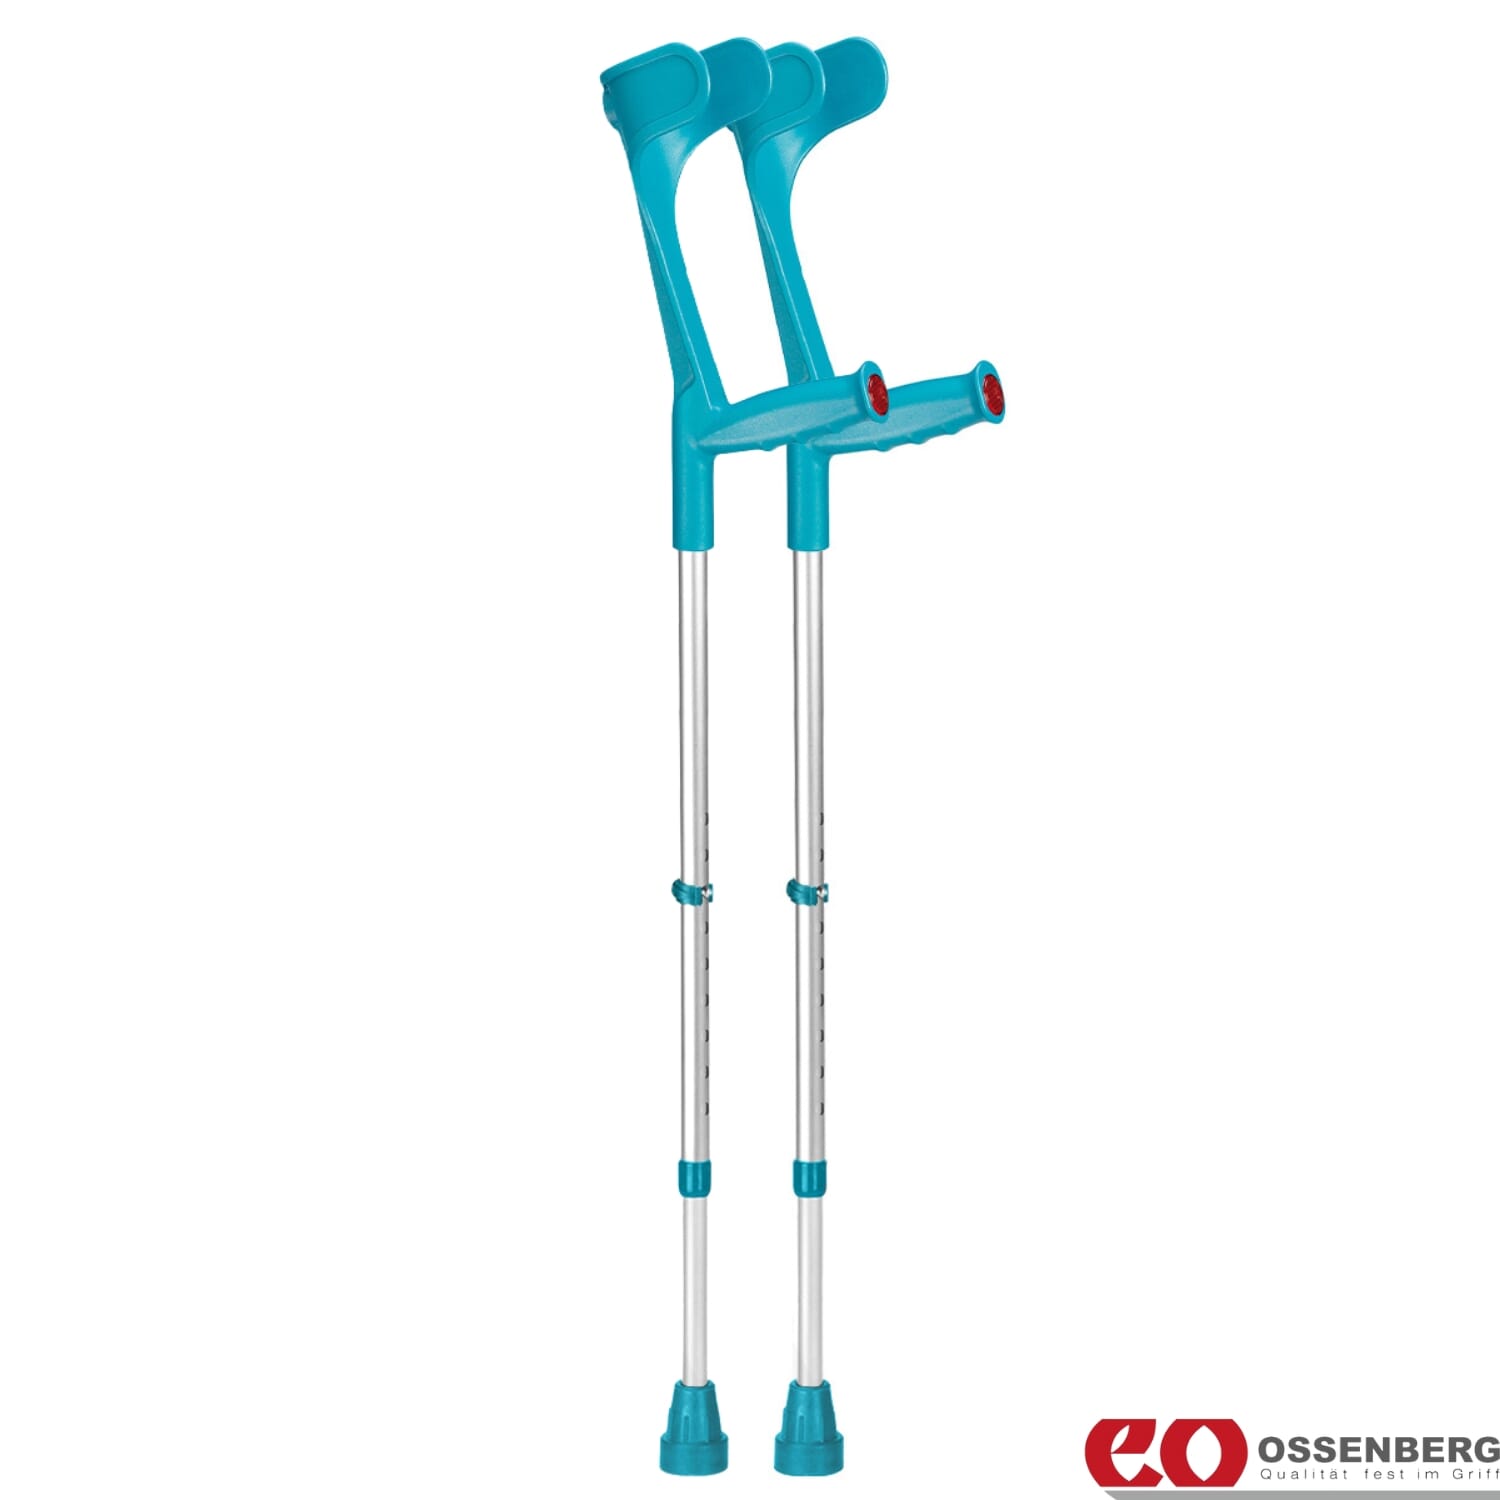 View Ossenberg Open Cuff Crutches Turquoise Pair information